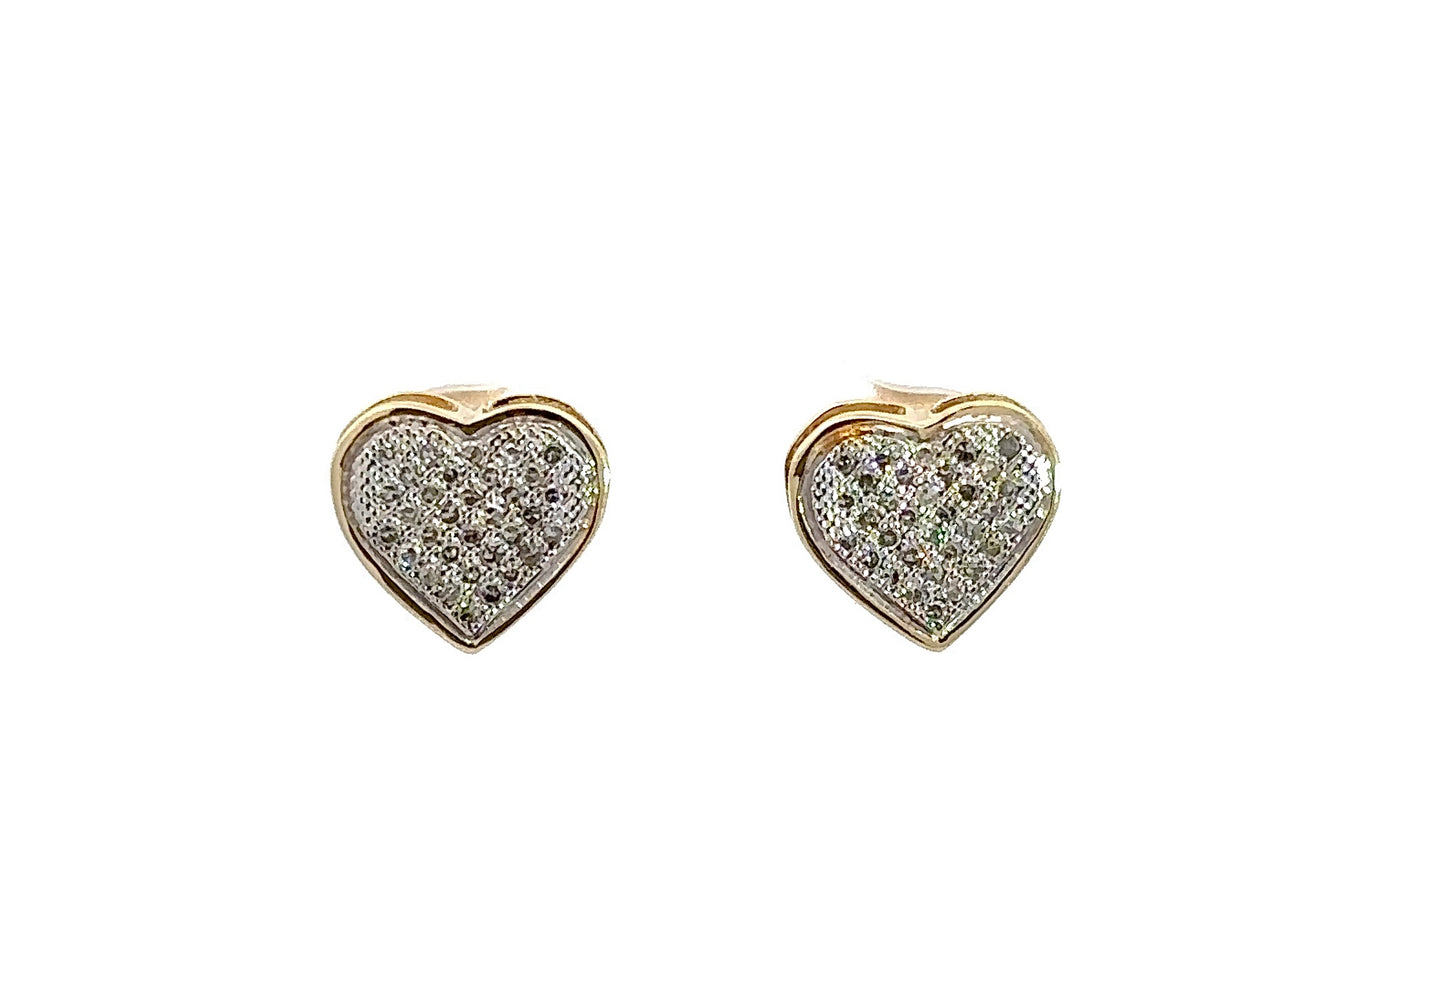 front of yellow and white gold heart earrings with small round diamonds on the heart